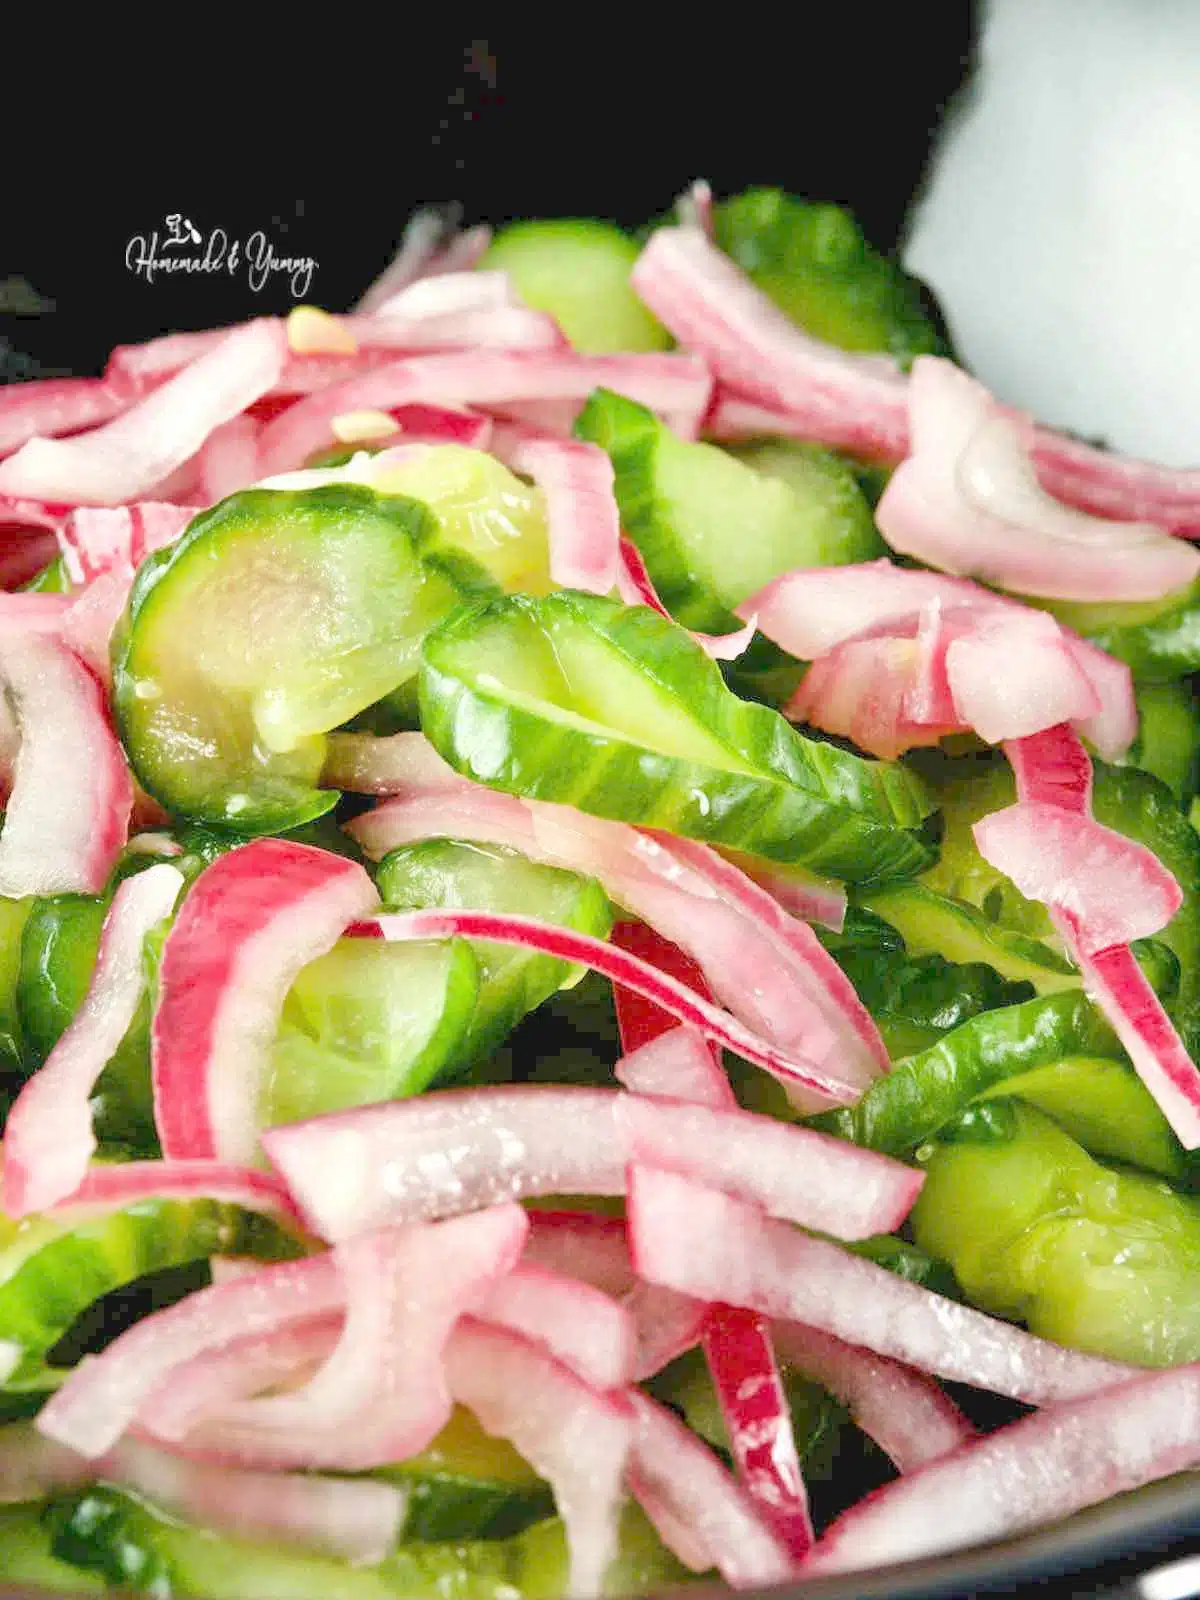 Cucumbers and red onions in a bowl.